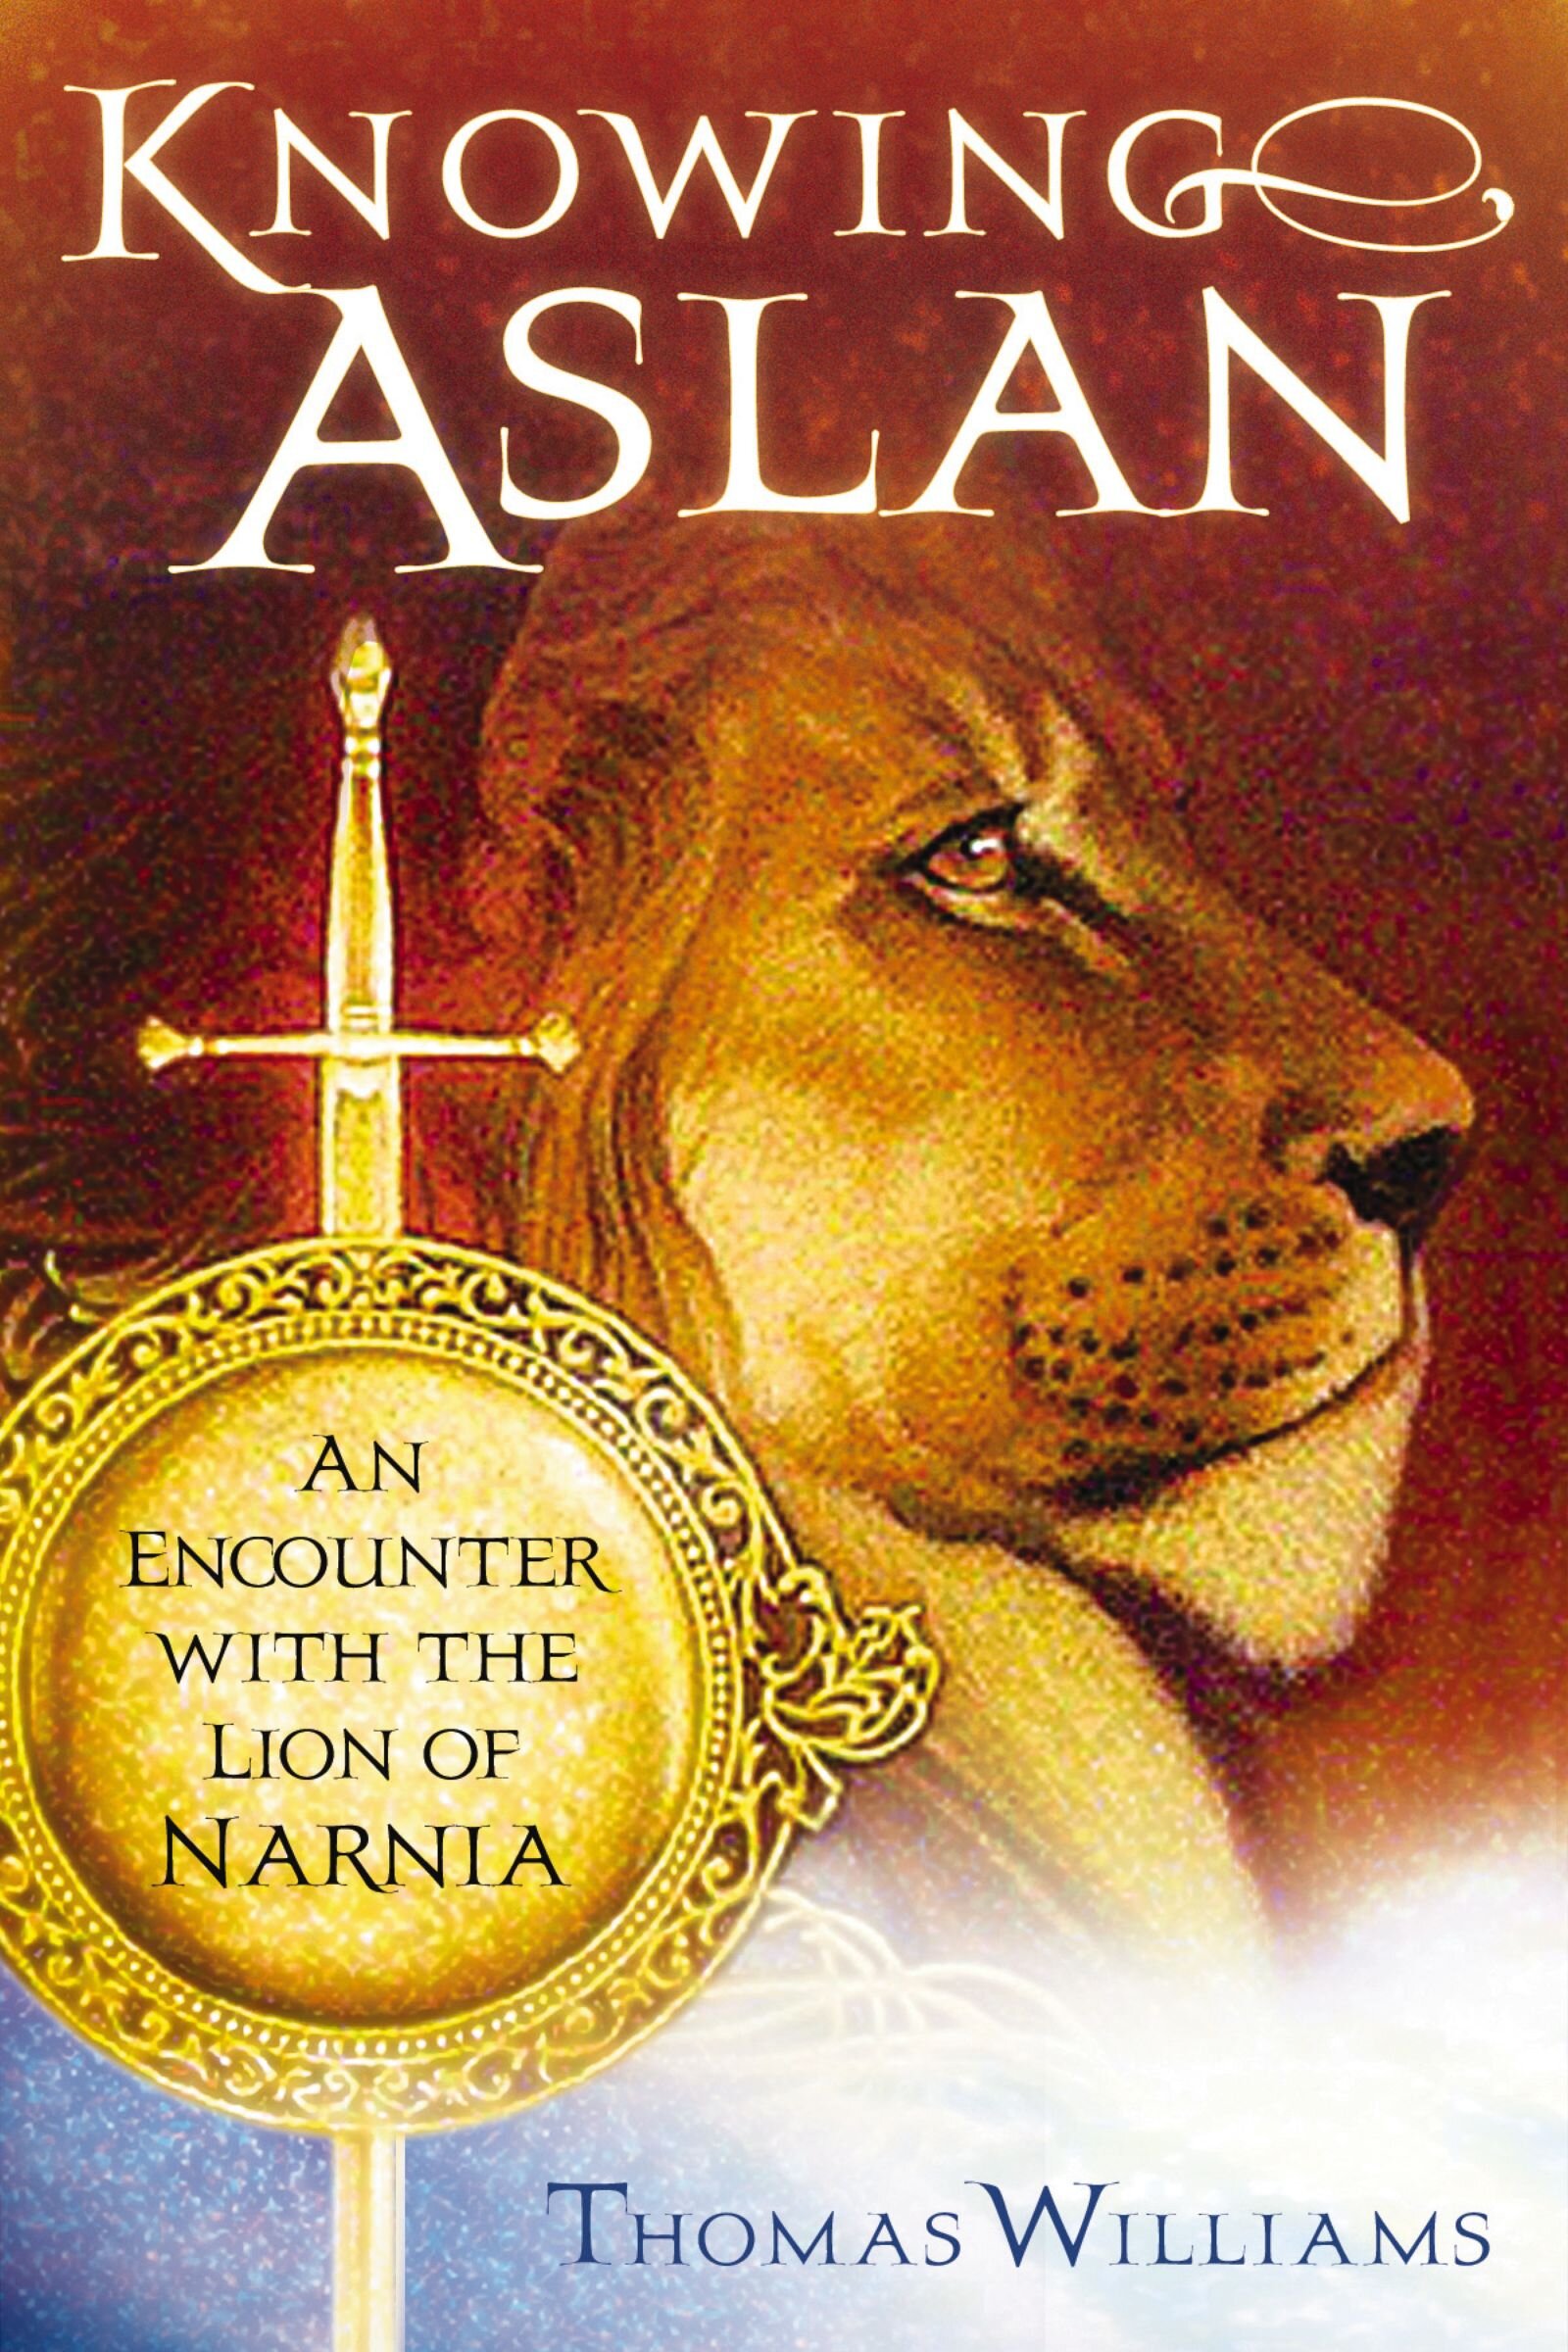 Chronicles of Narnia on X: NARNIA CONFESSIONS: The name Aslan